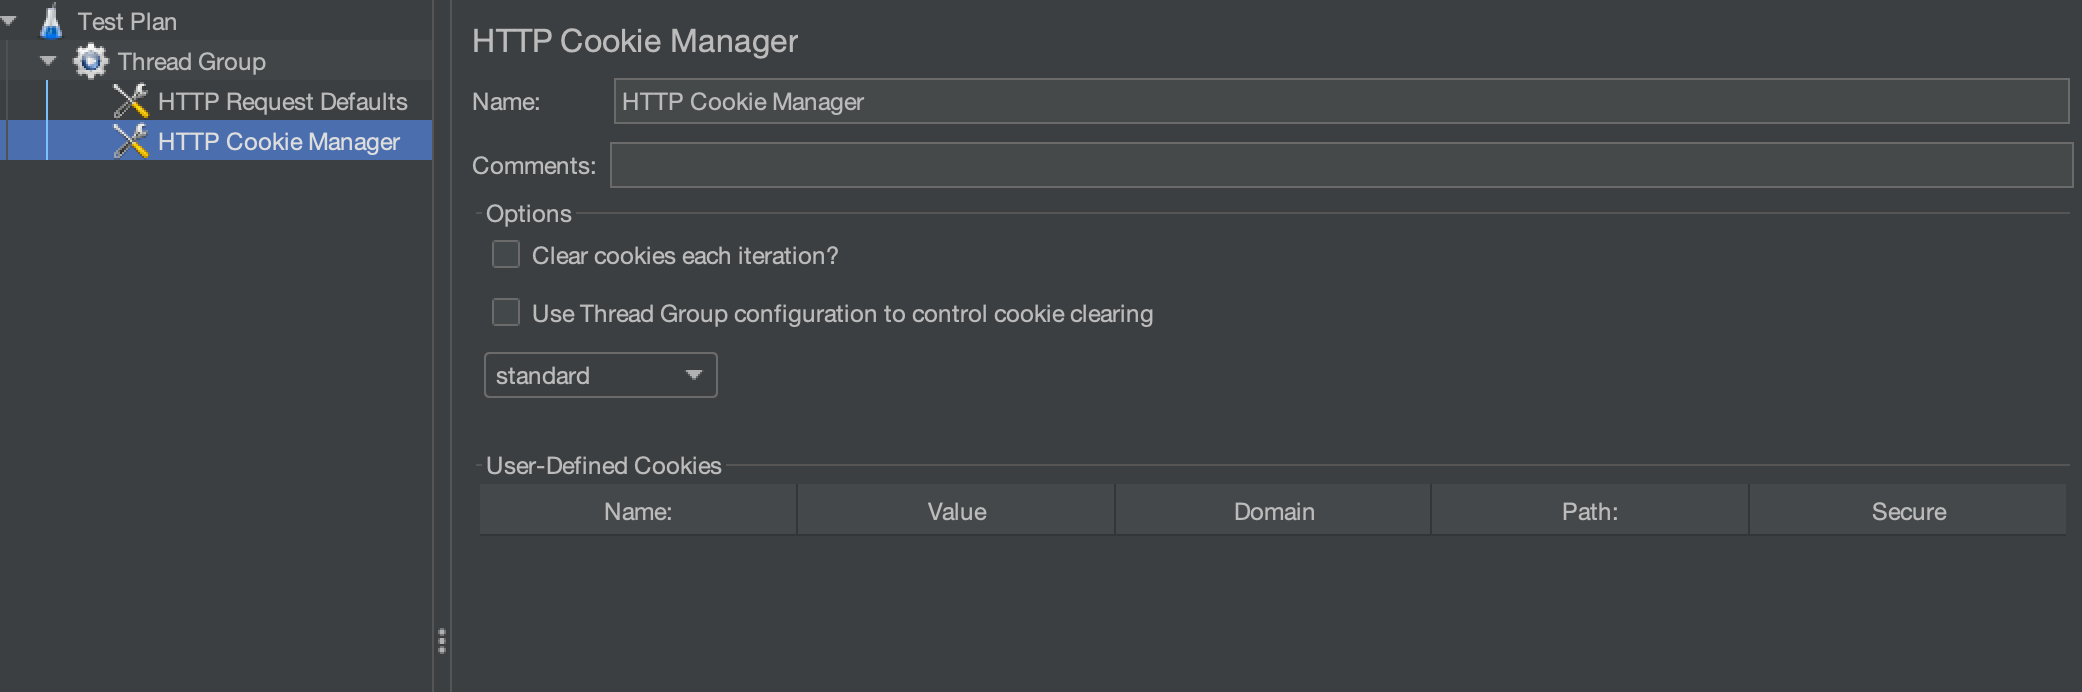 HTTP Cookie Manager